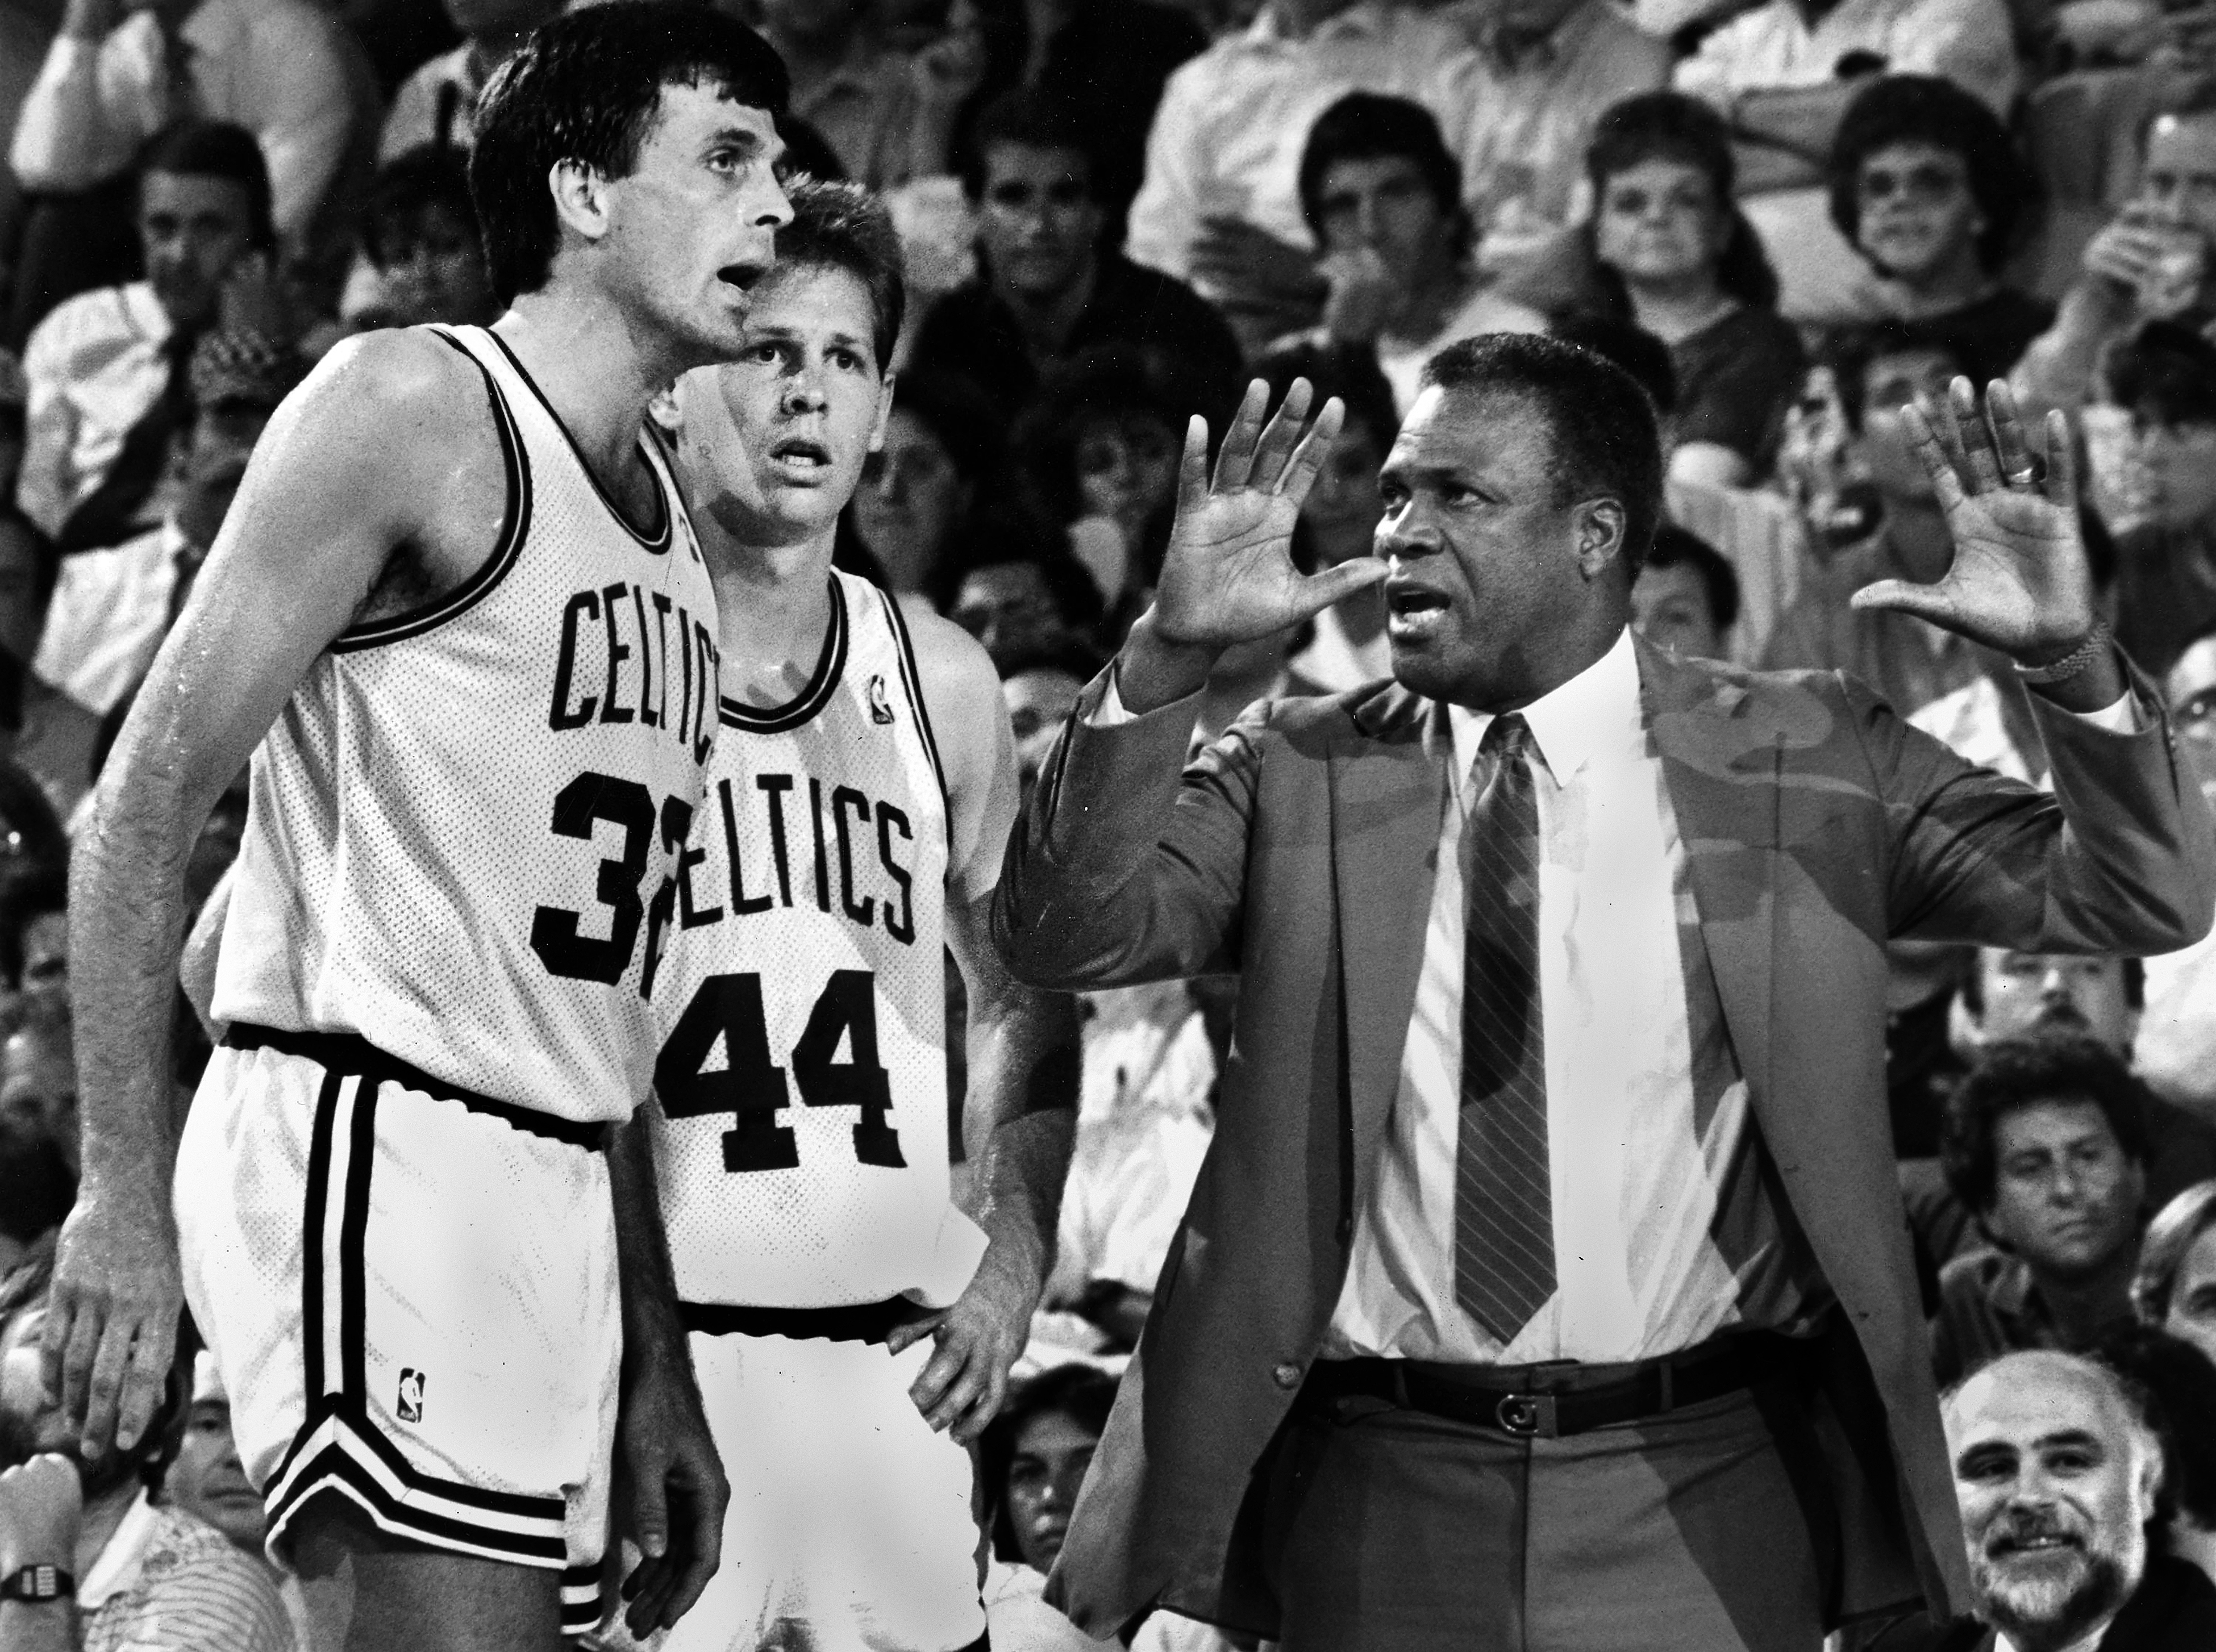 K.C. Jones, Celtics great and coach, combined greatness with class